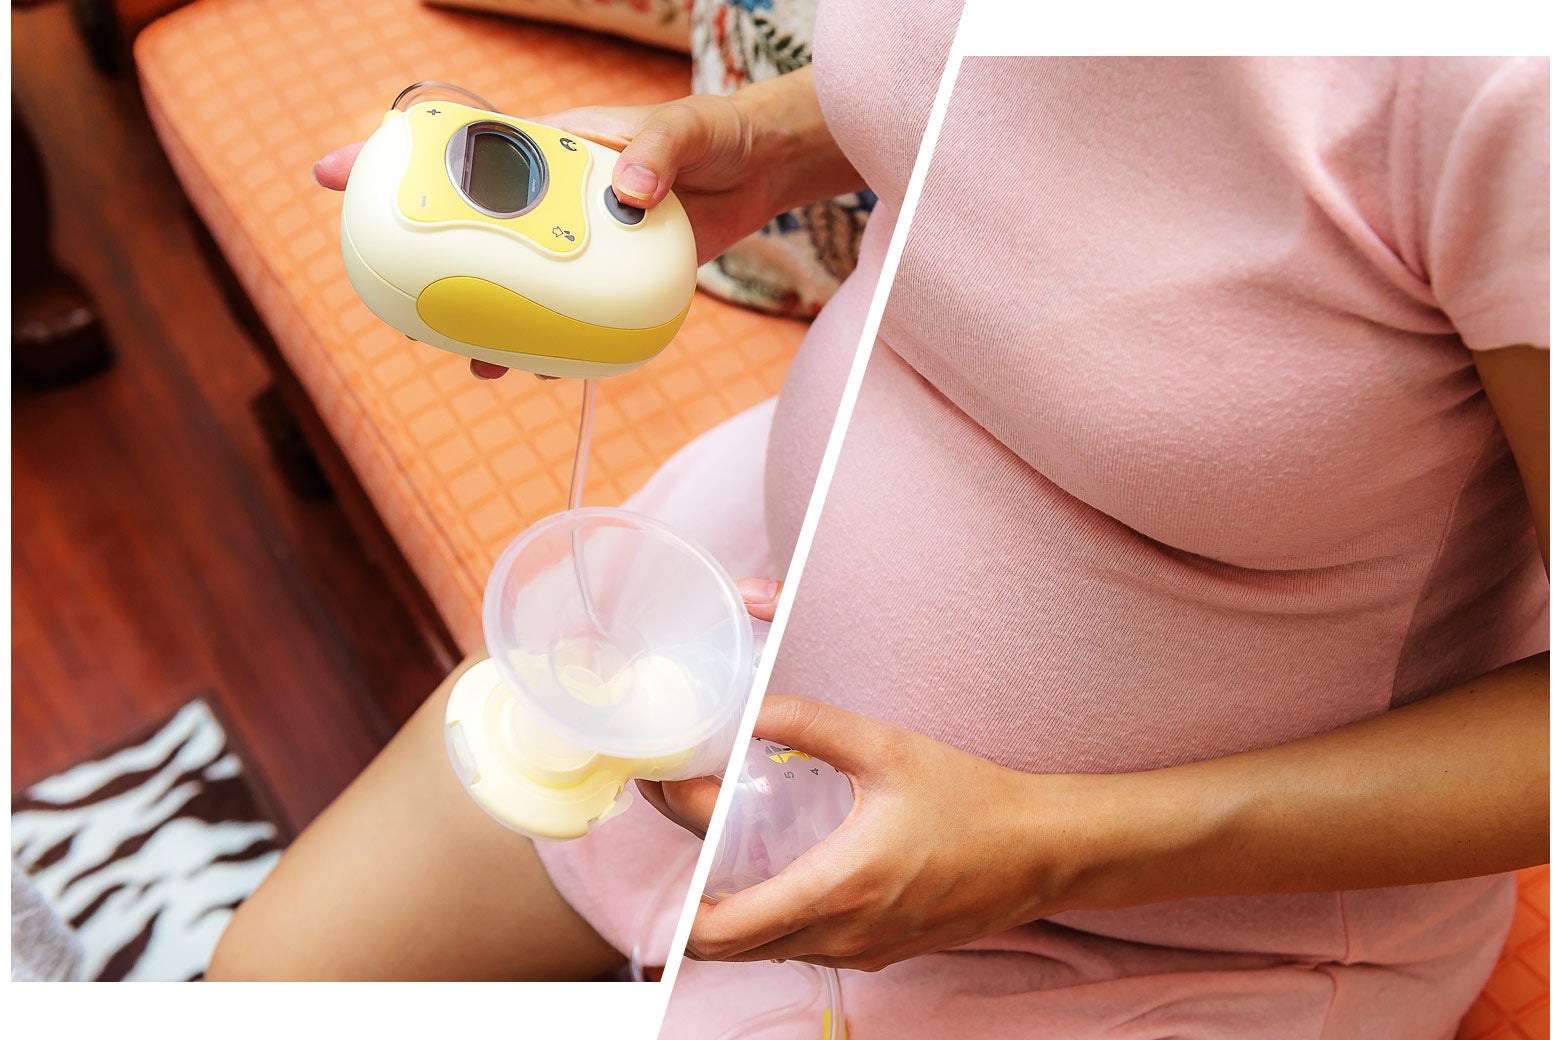 A woman holding a breast pump.